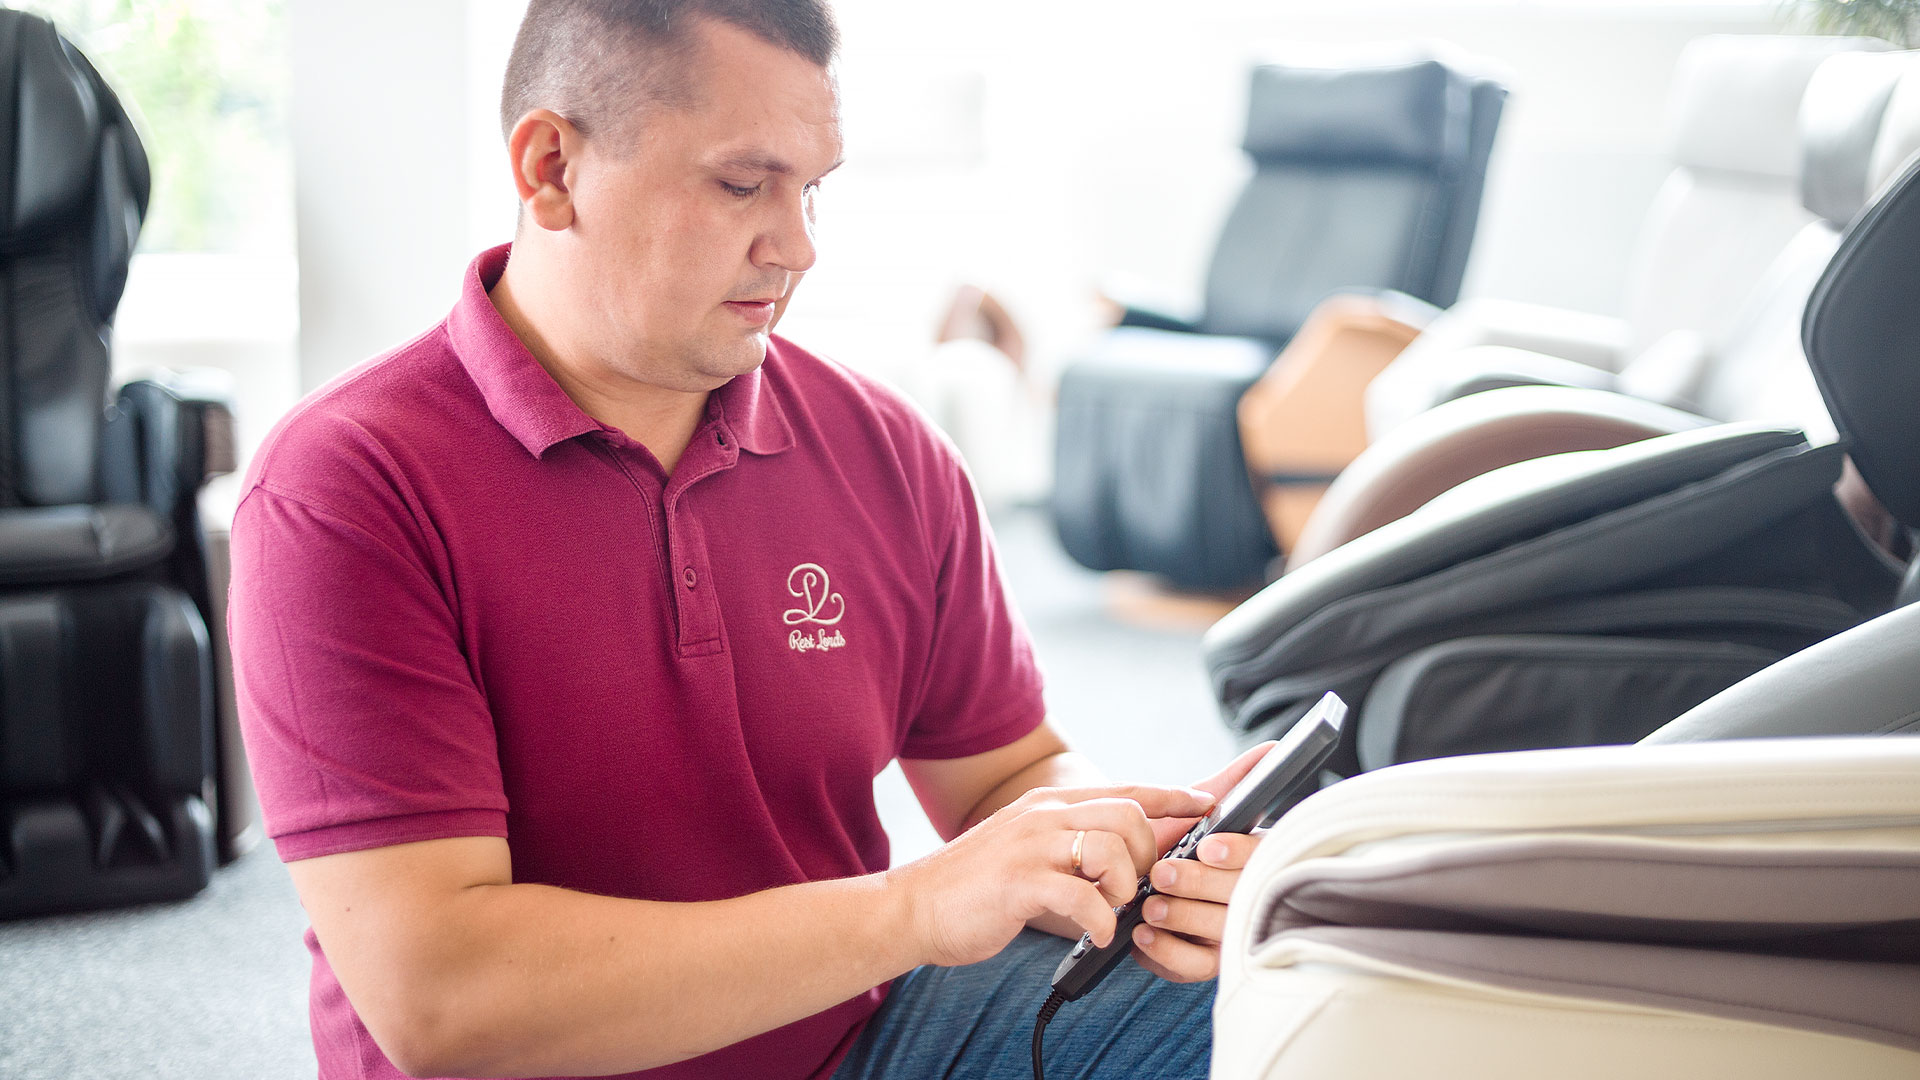 Guarantee and service of massage chair